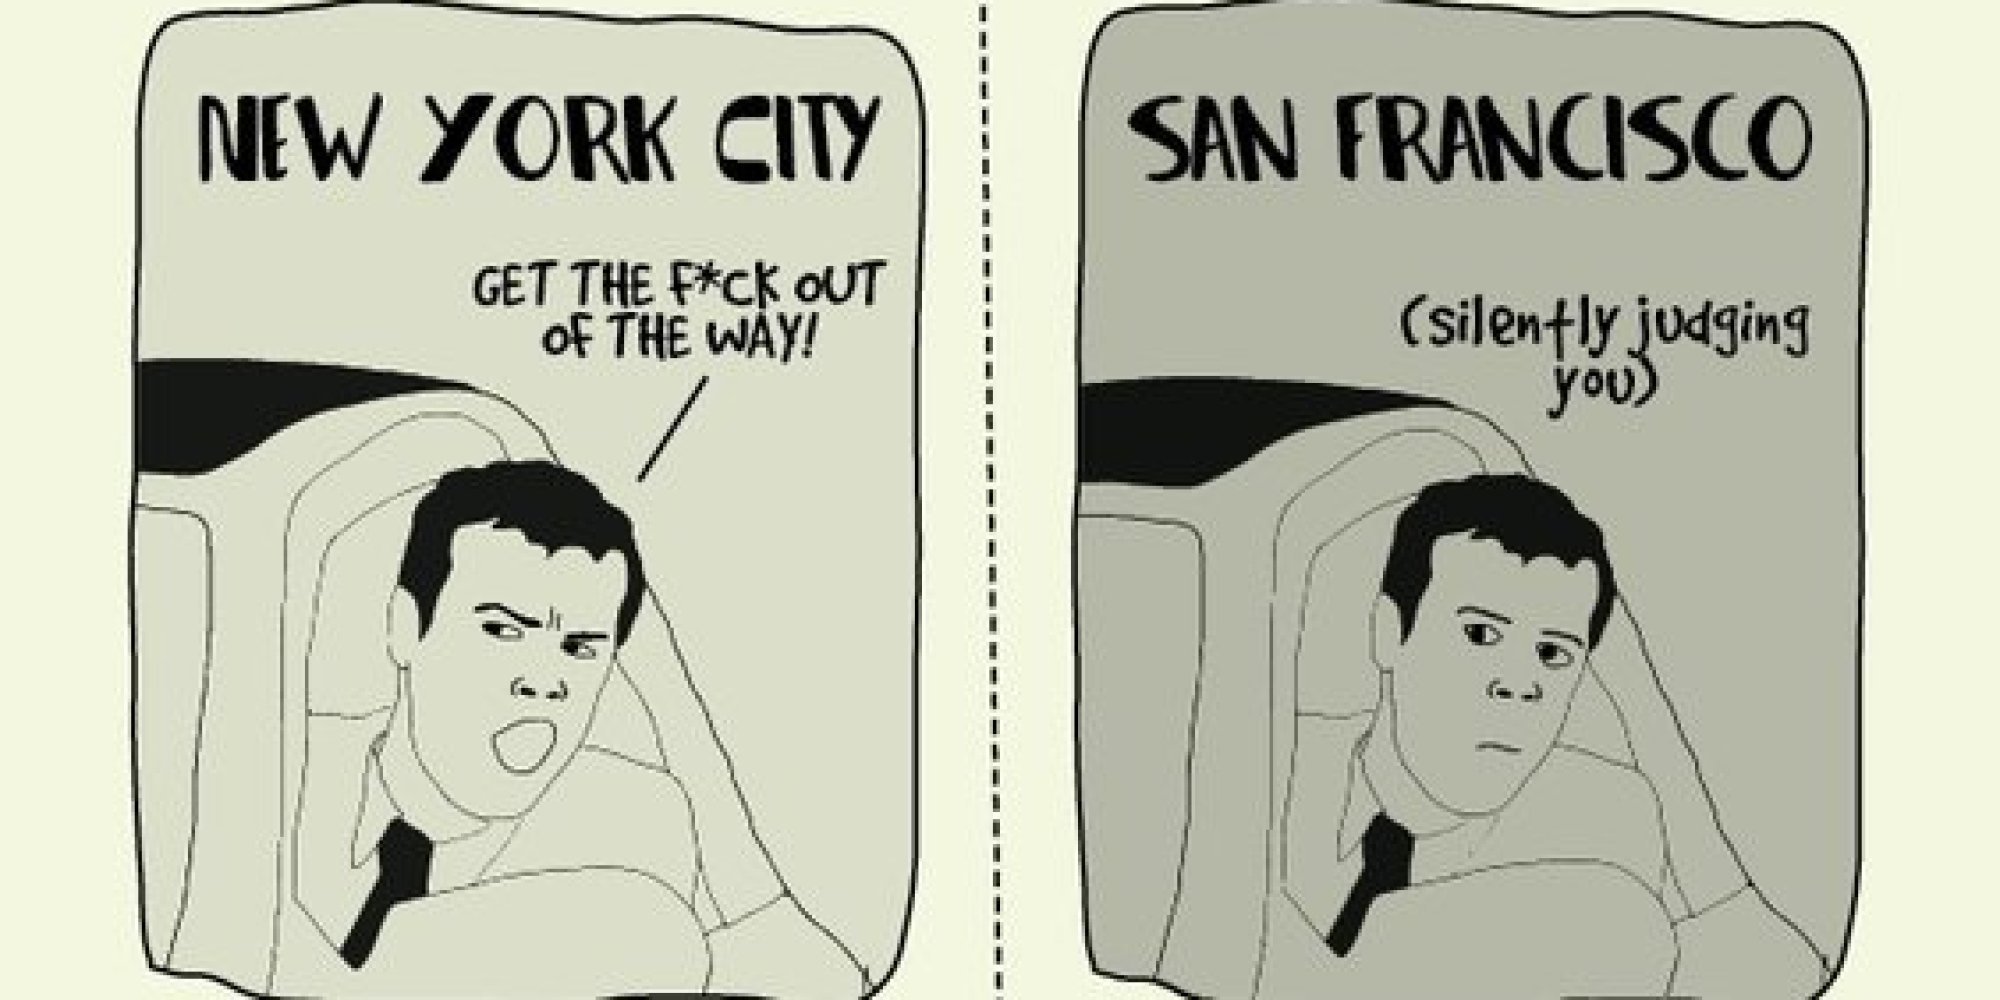 difference between new york and california